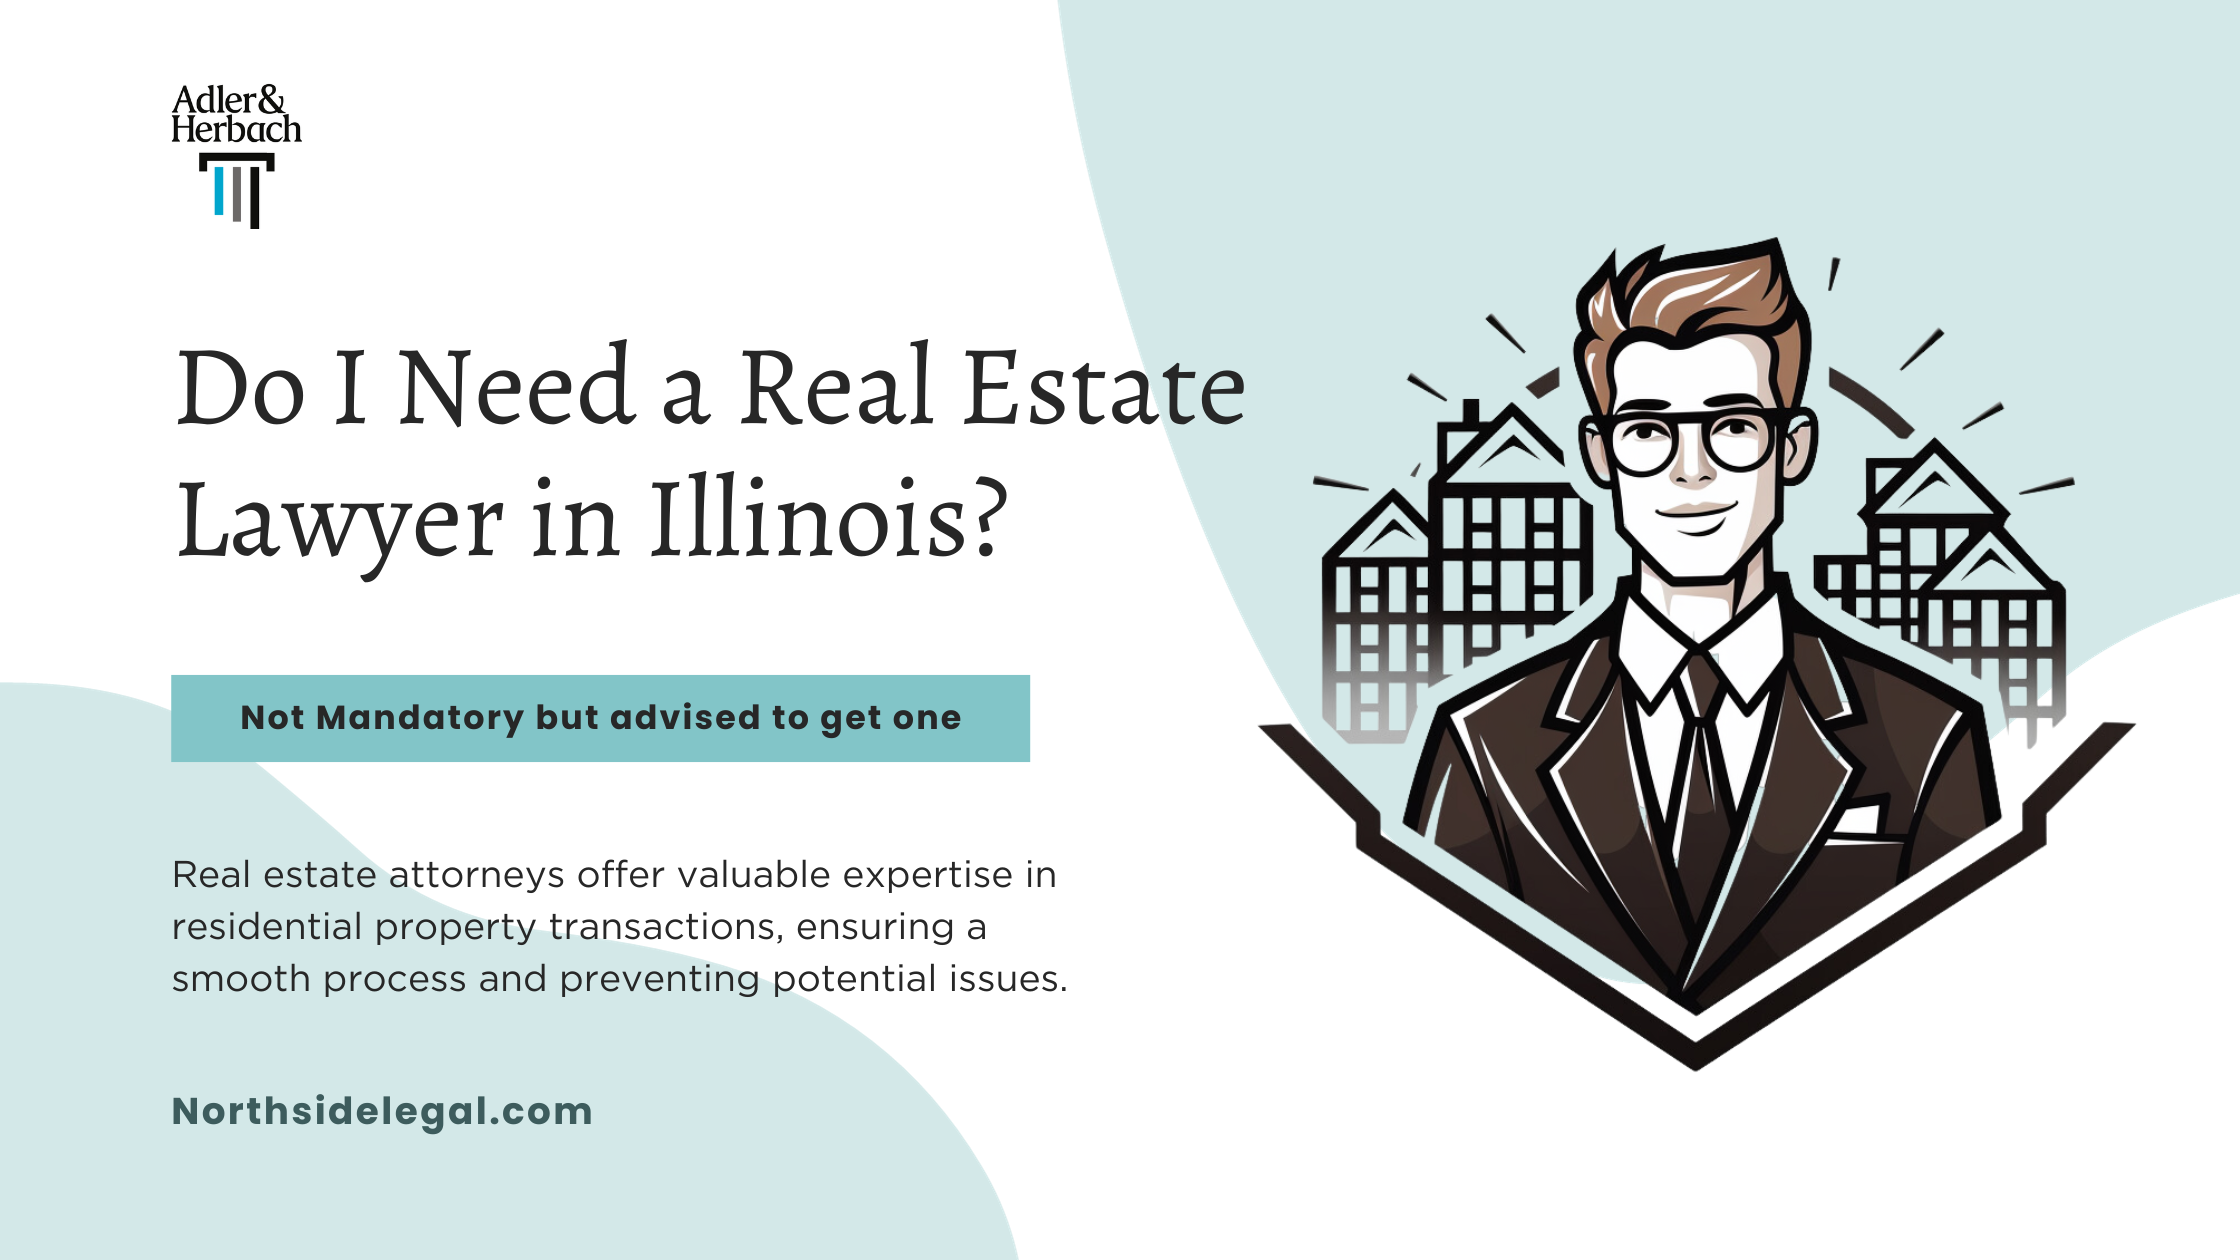 Do I Need a Real Estate Lawyer in Illinois?